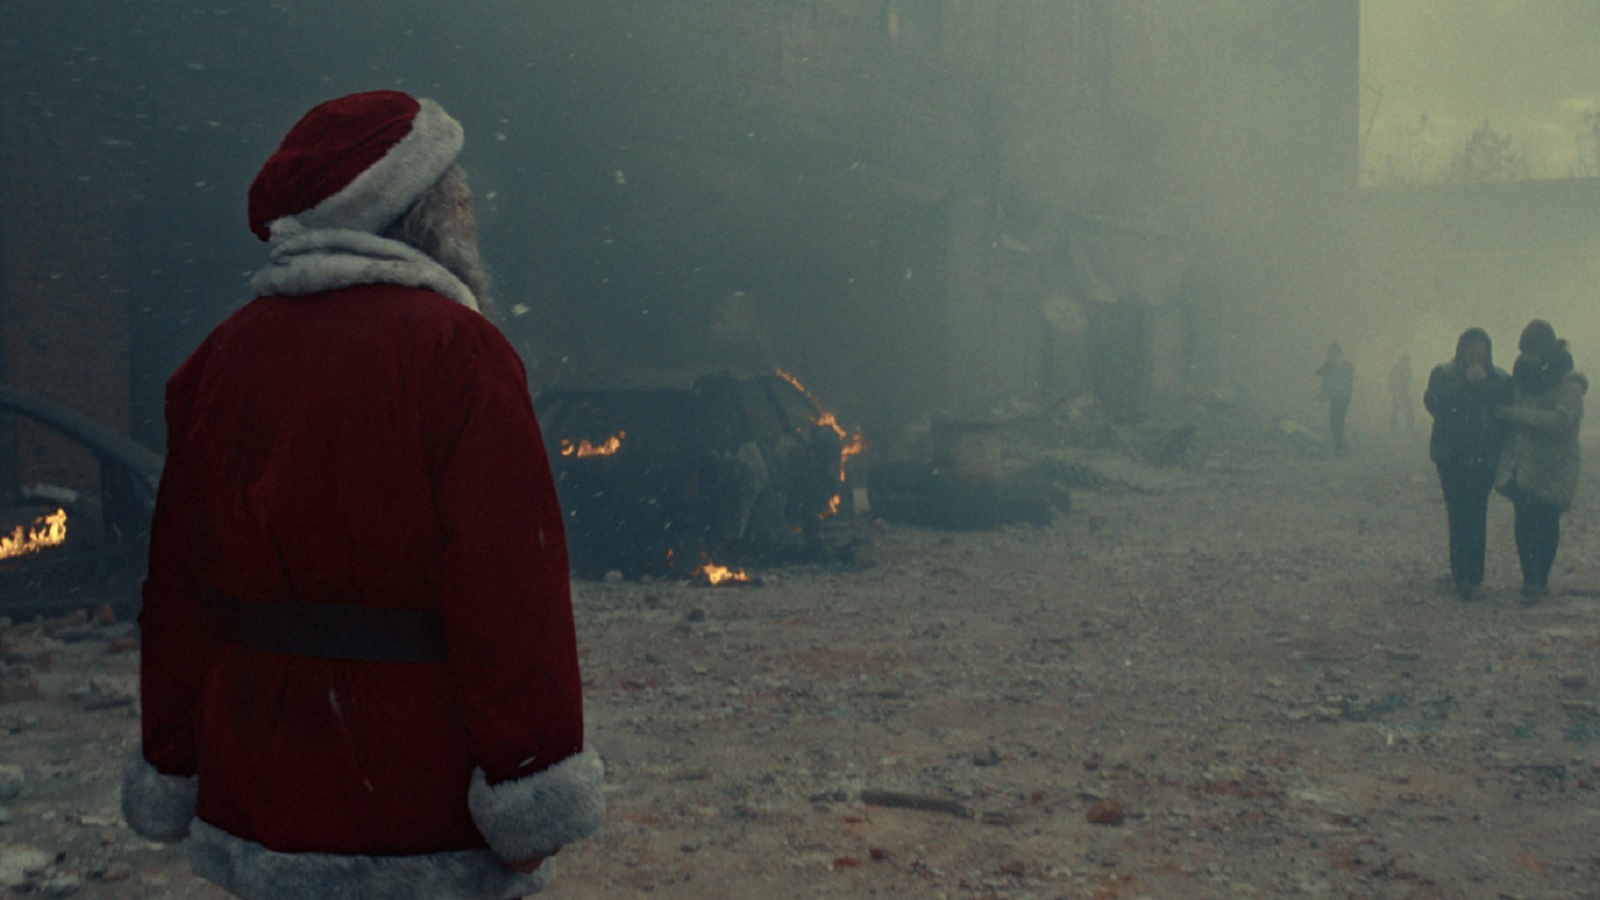 Santa Lands in War Zone to Deliver the Most Precious Gift